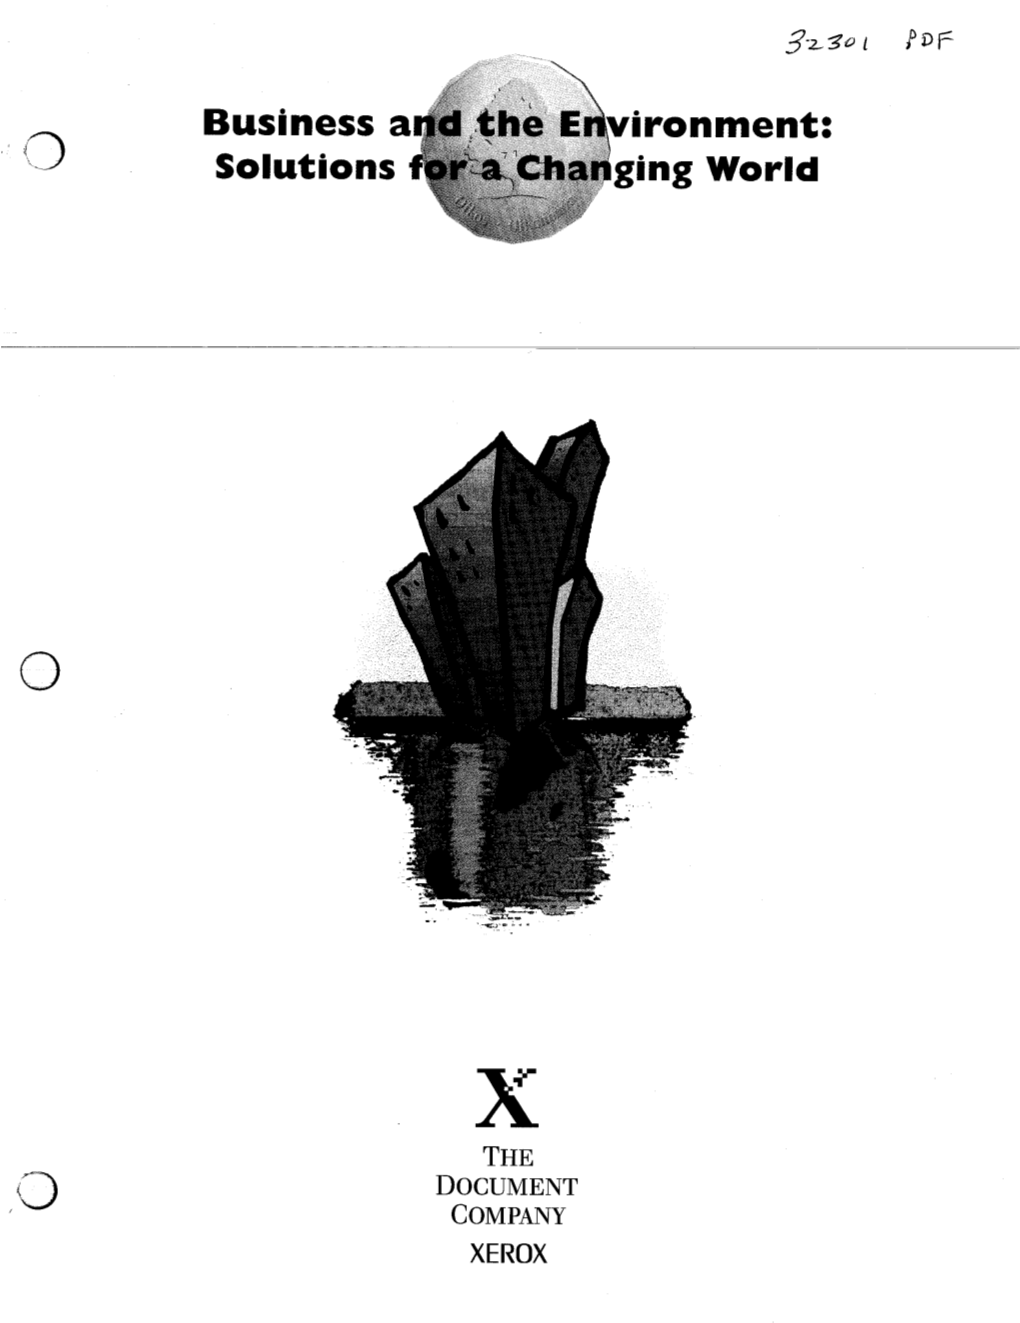 Solutions for a Changing World Publications to Share This Knowledge with Our Customers and Other Interested Businesses